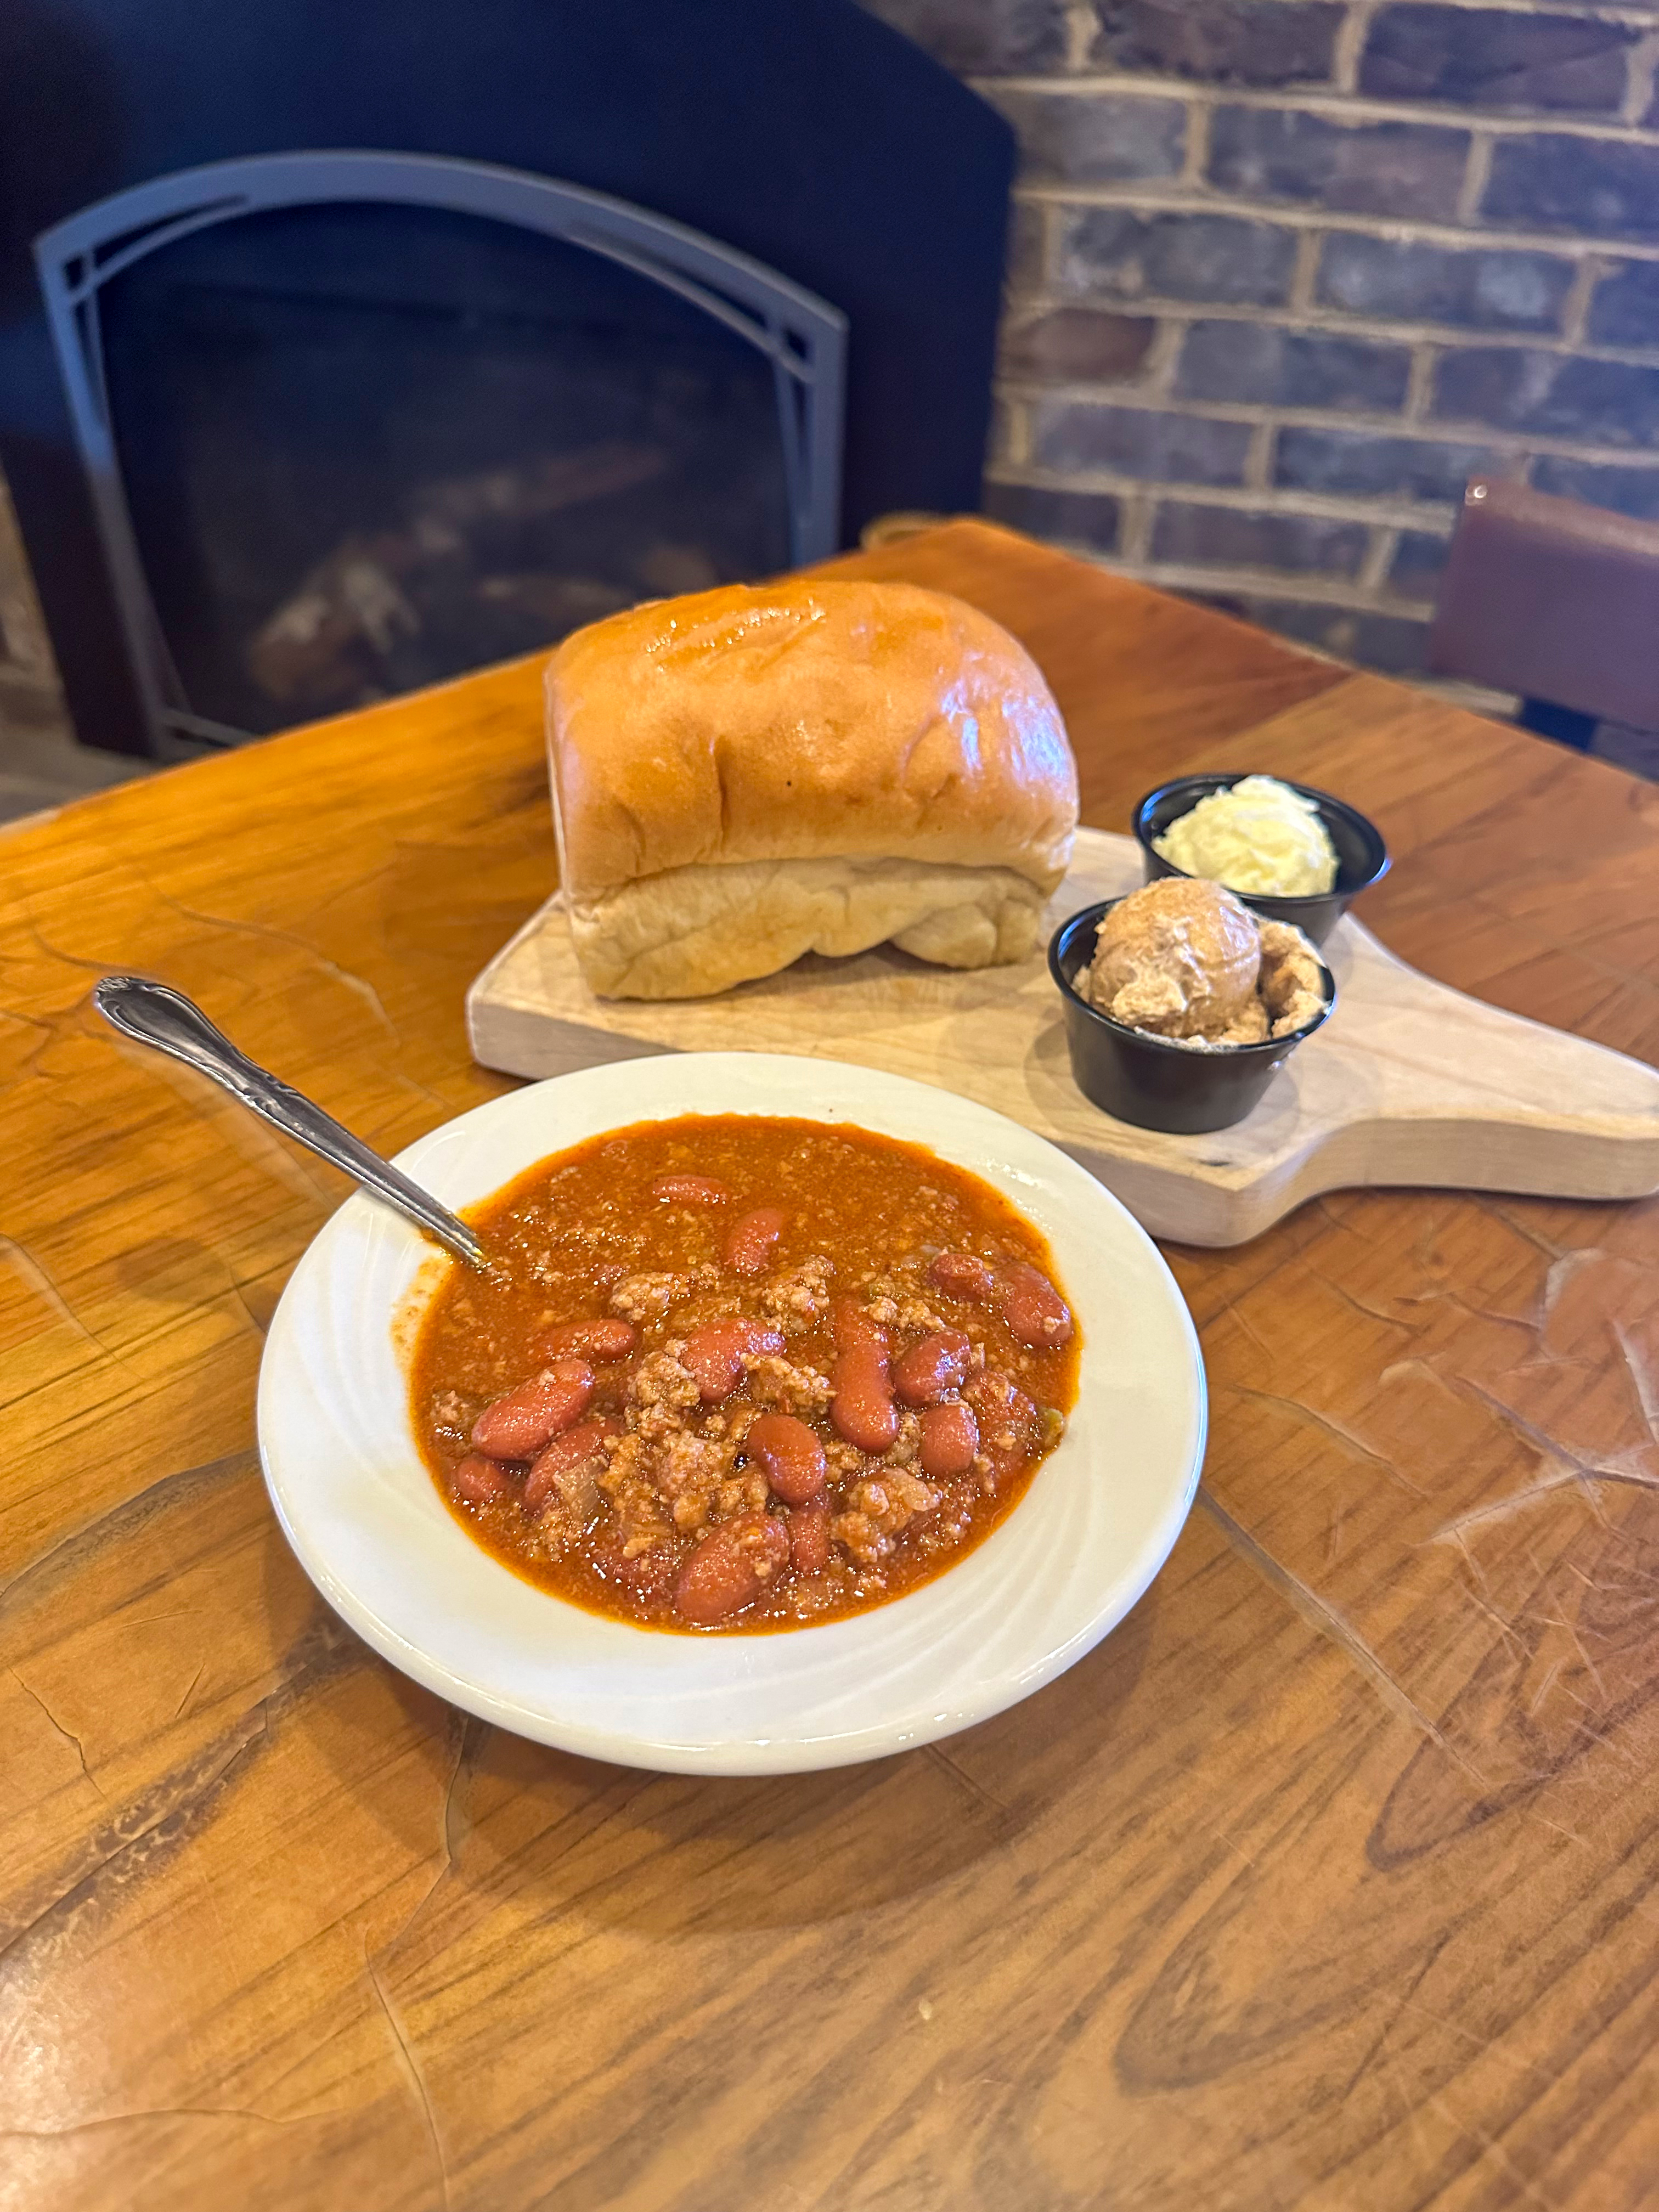 Our award winning chilli with our delicious bread.